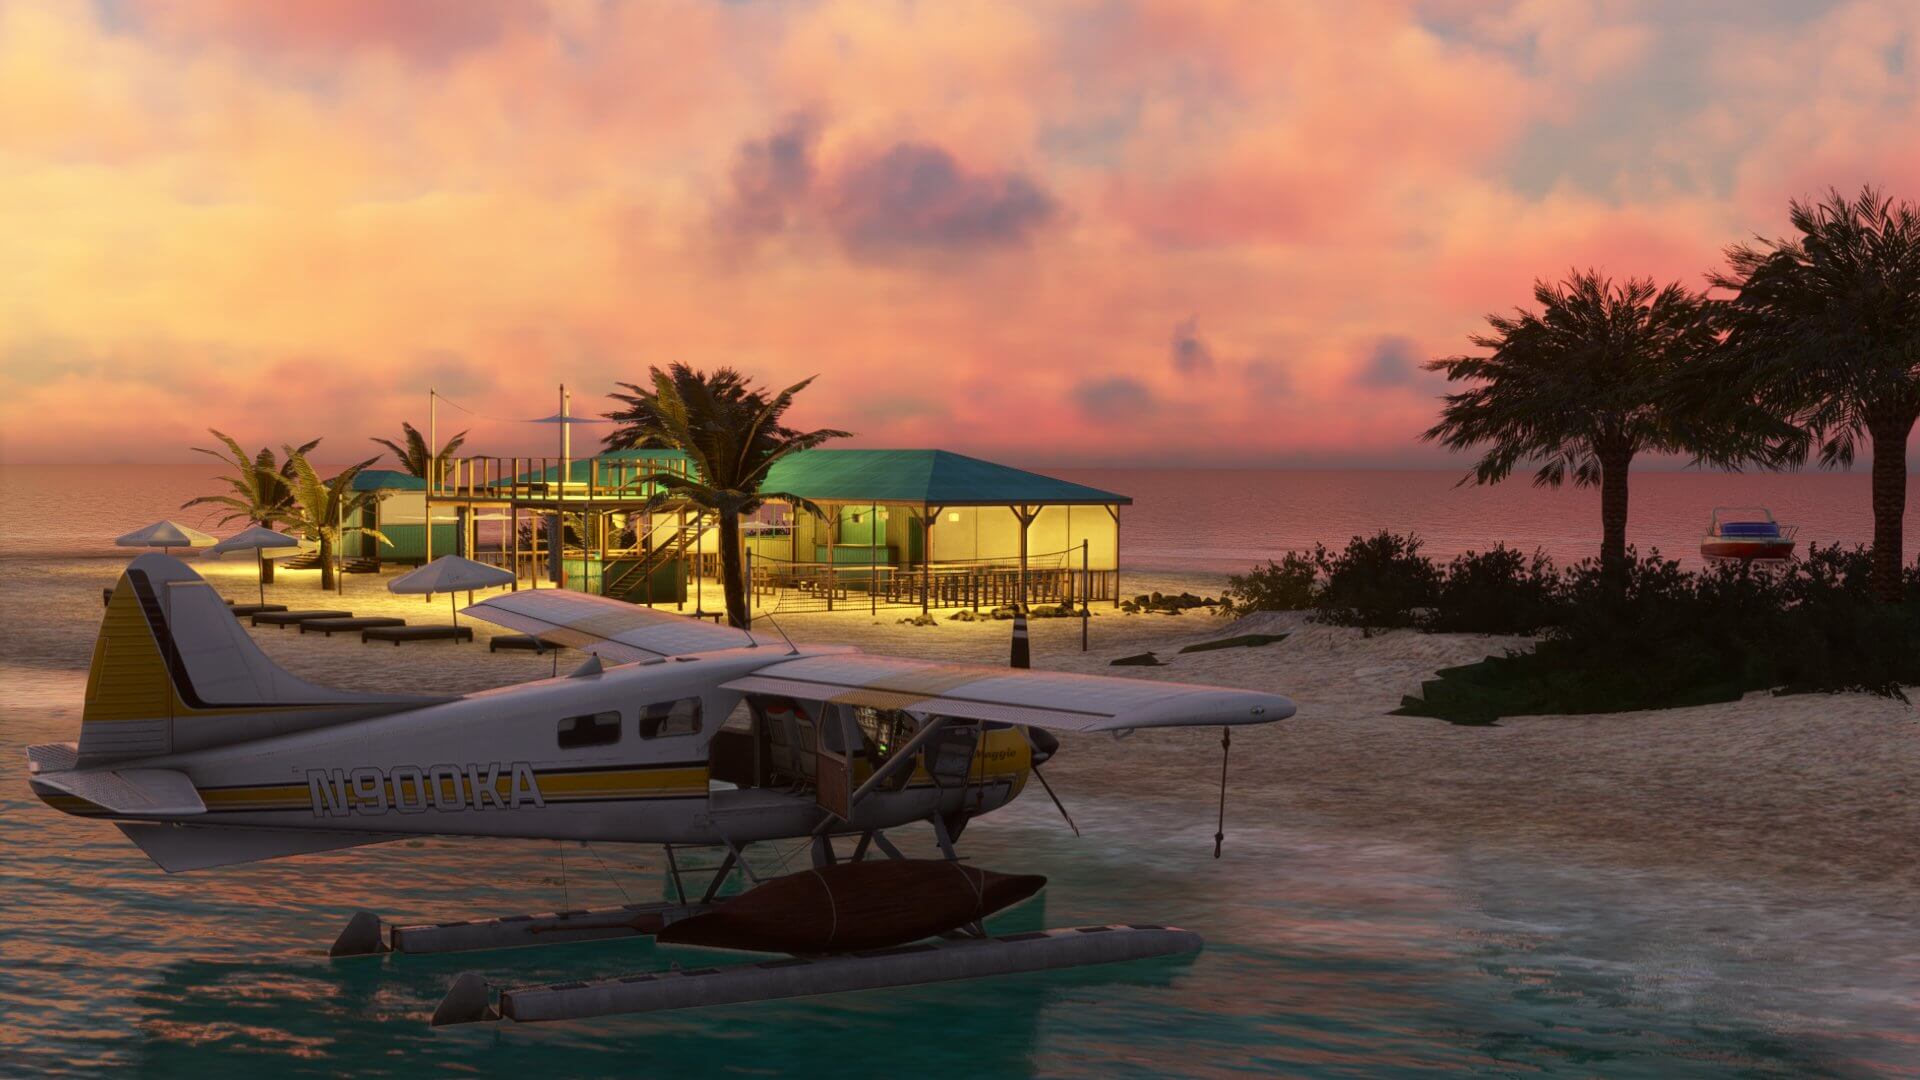 A Cessna propeller aircraft with floats, sits idly on the water next to a Caribbean island hut